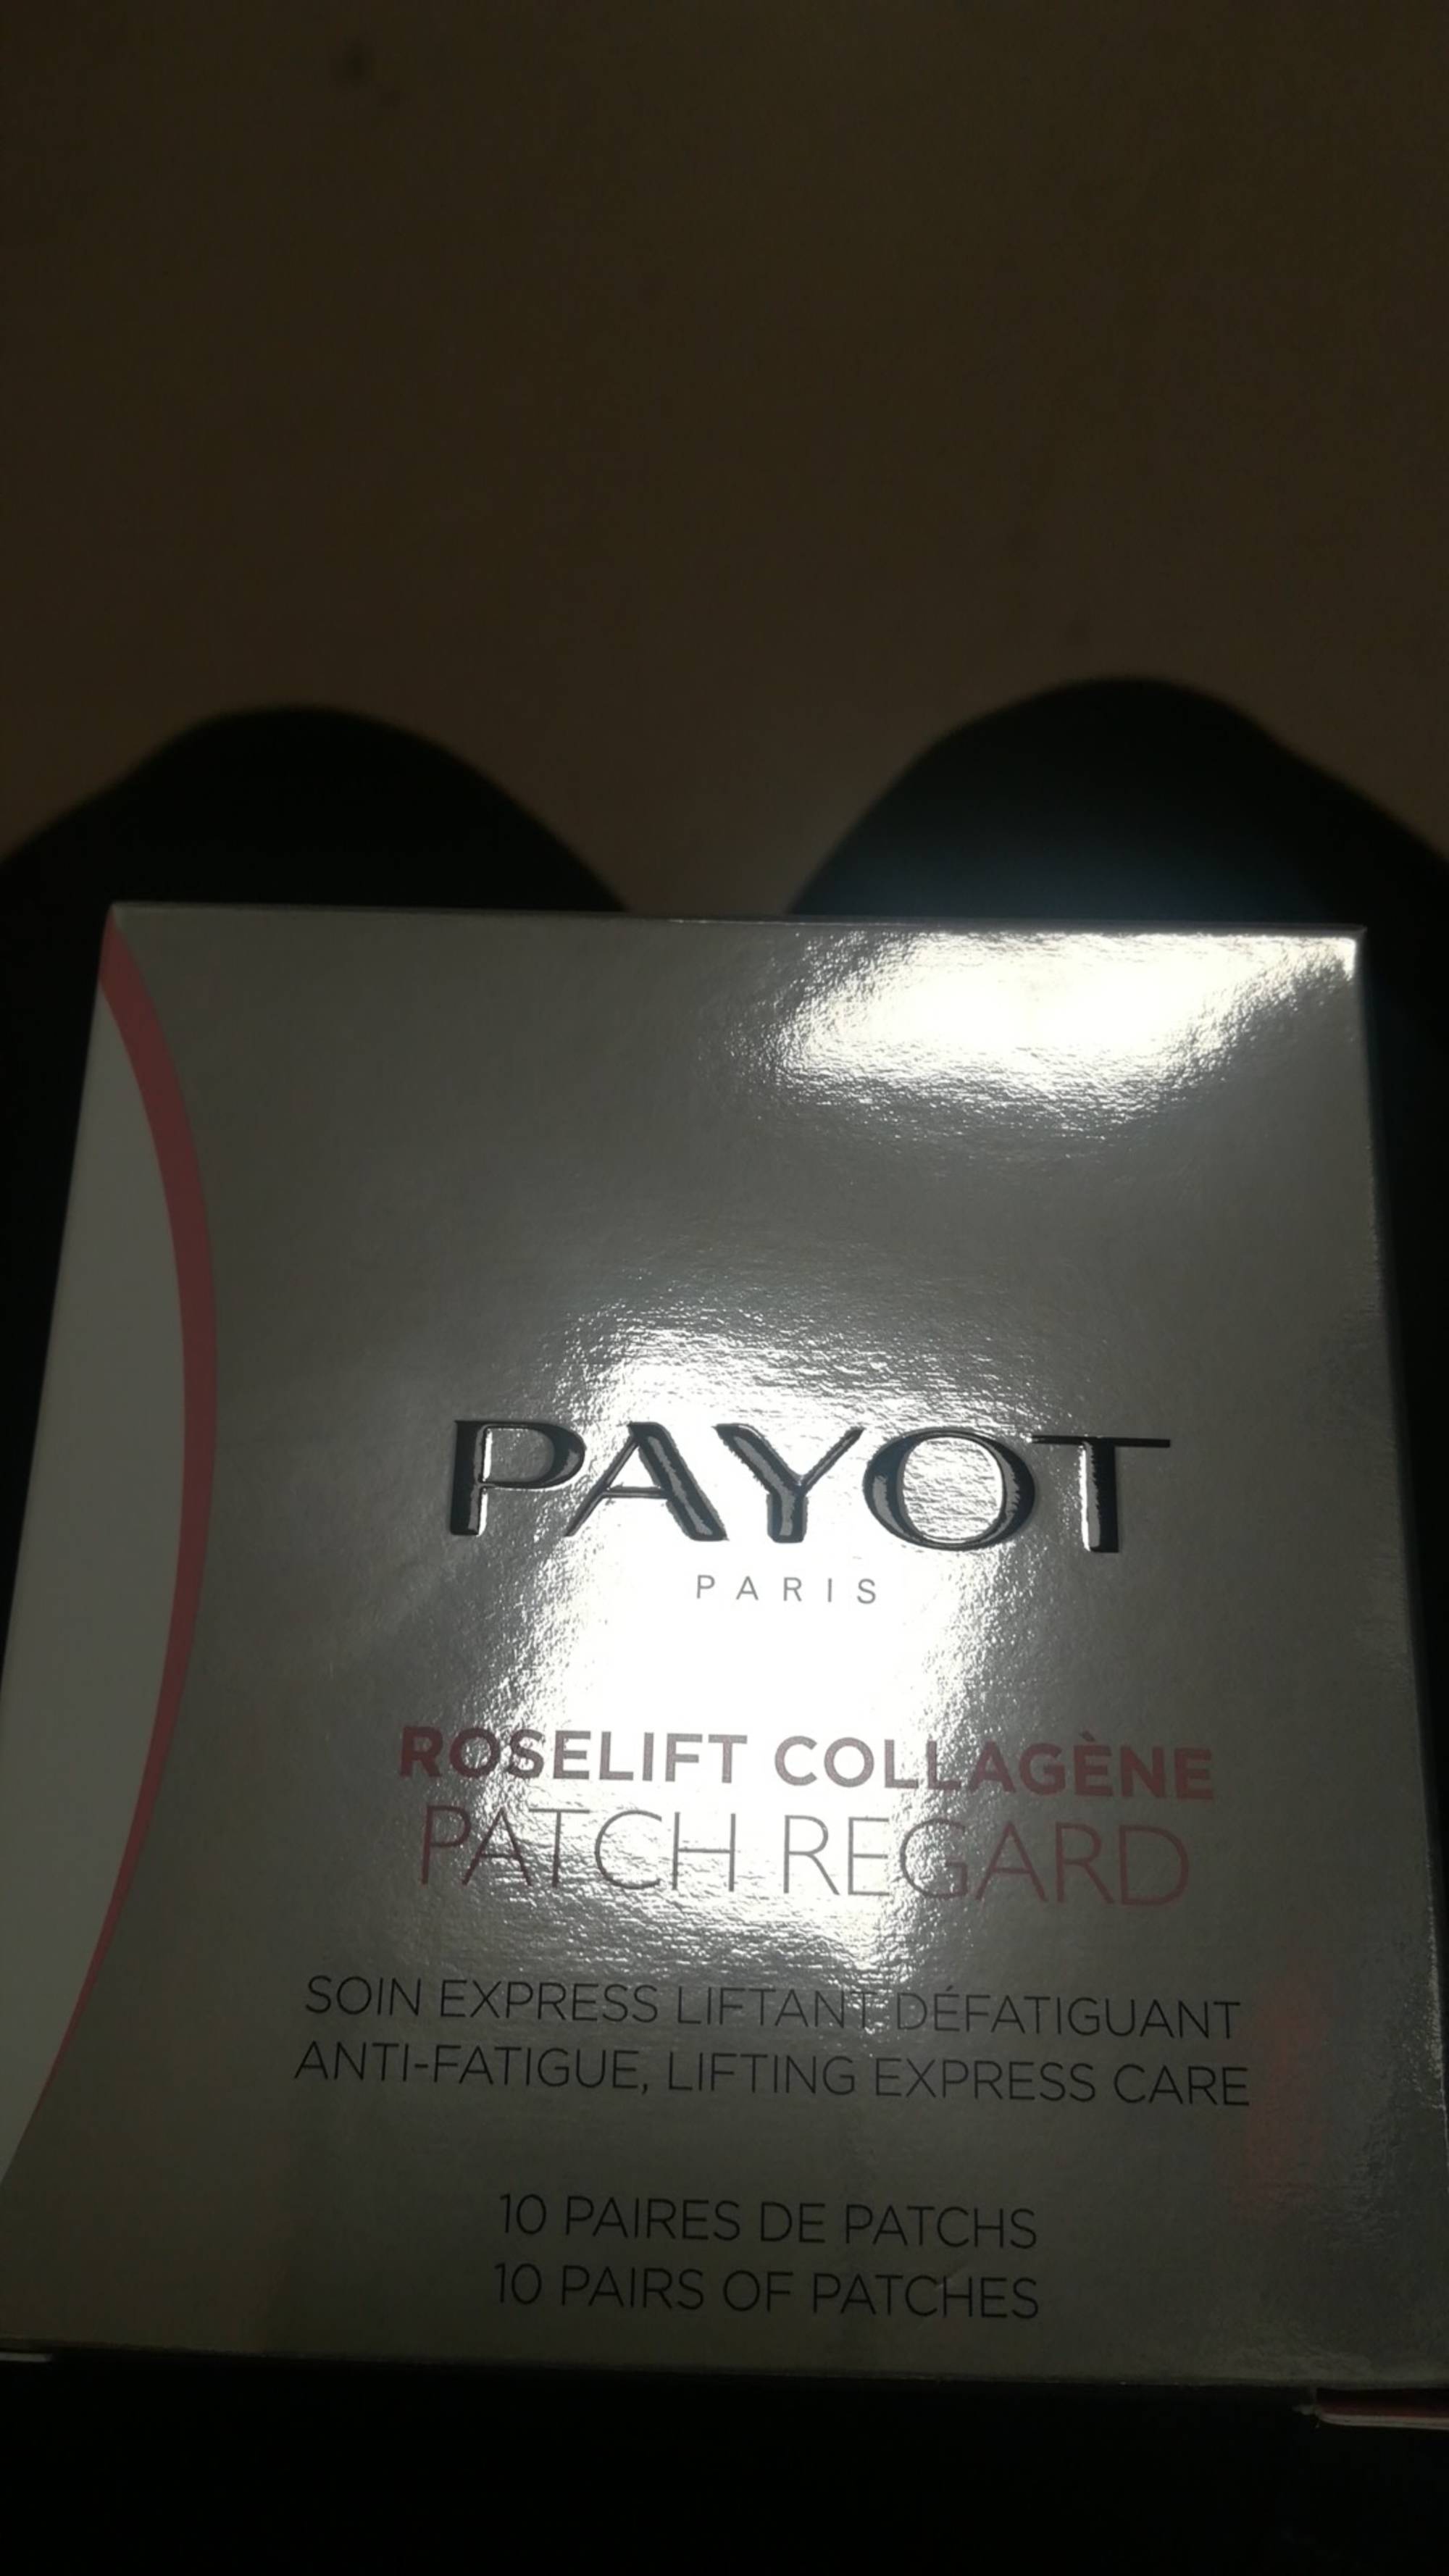 PAYOT - Patch regard - Soin express liftant défatiguant